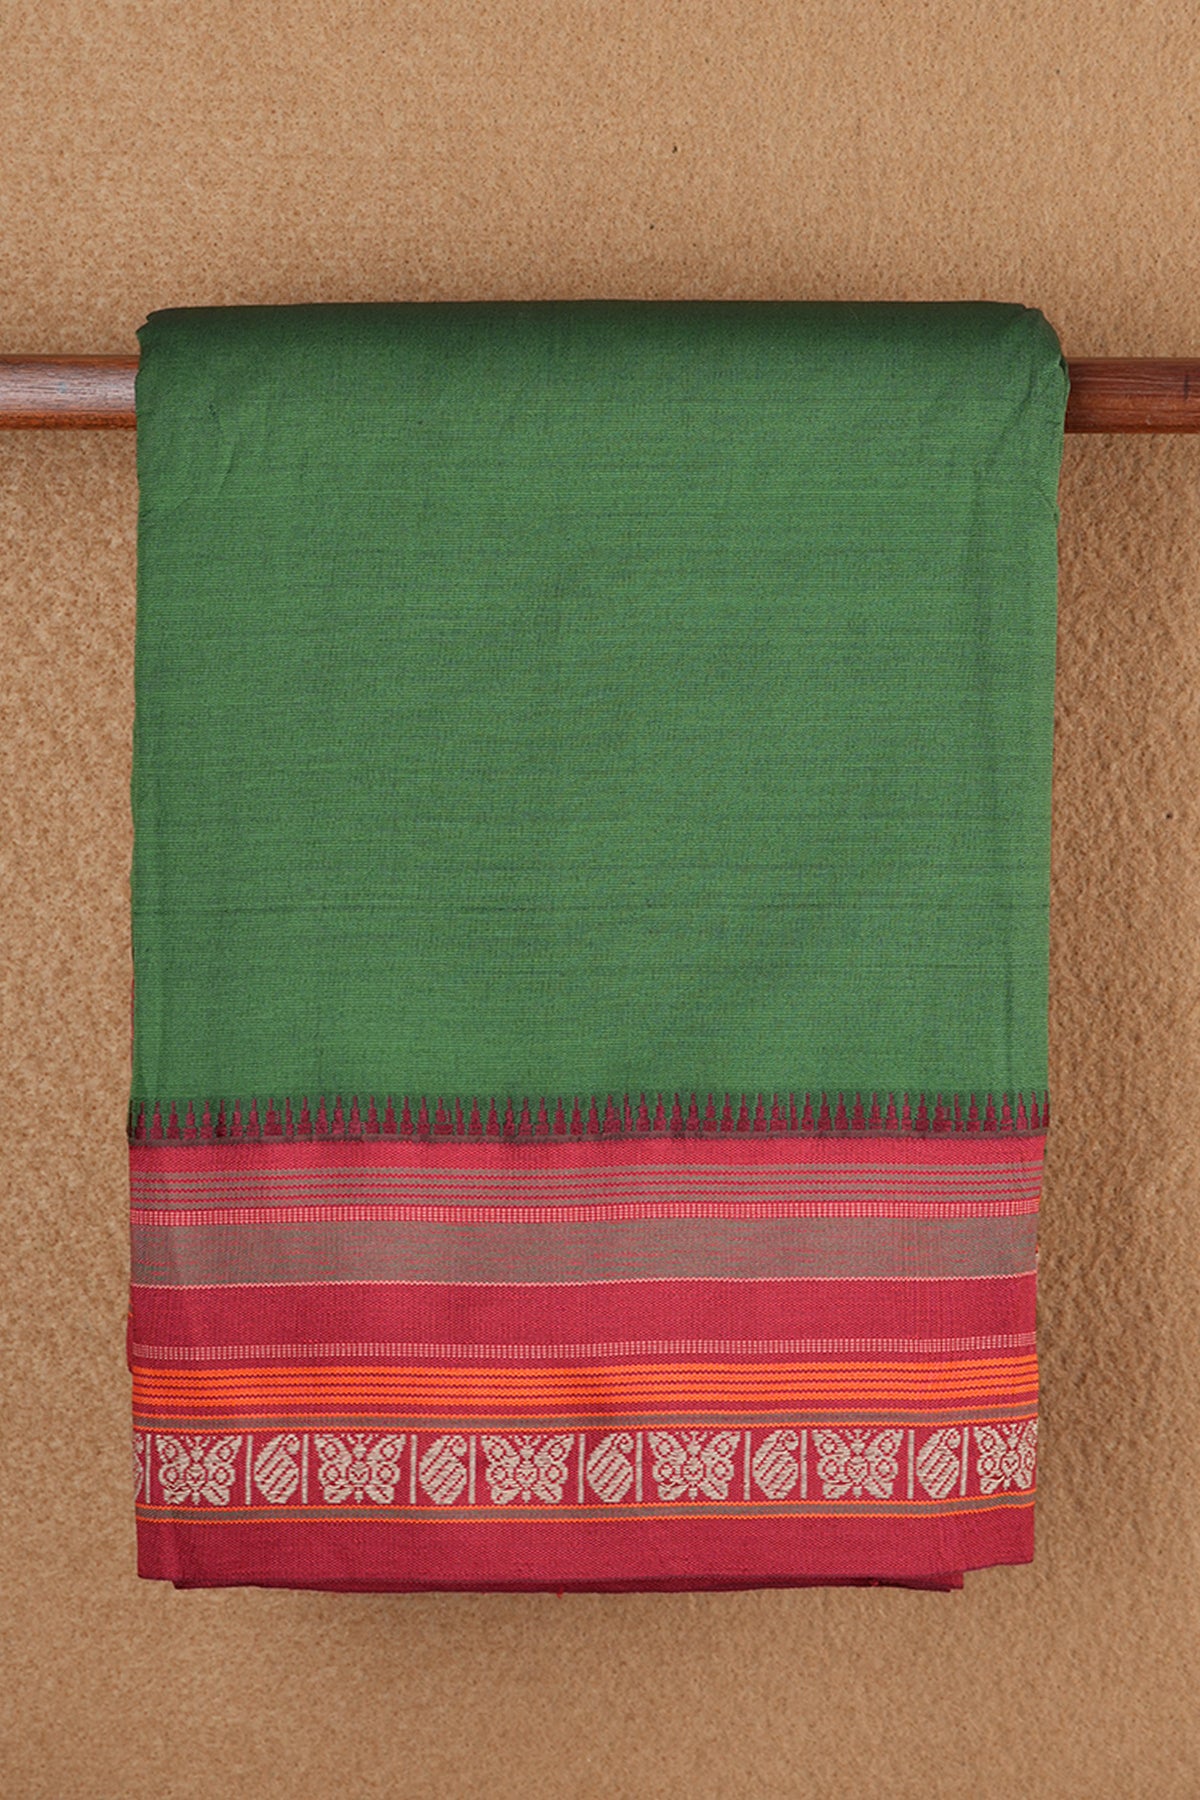 Butterfly and Paisley Threadwork Border With Plain Emerald Green Dharwad Cotton Saree